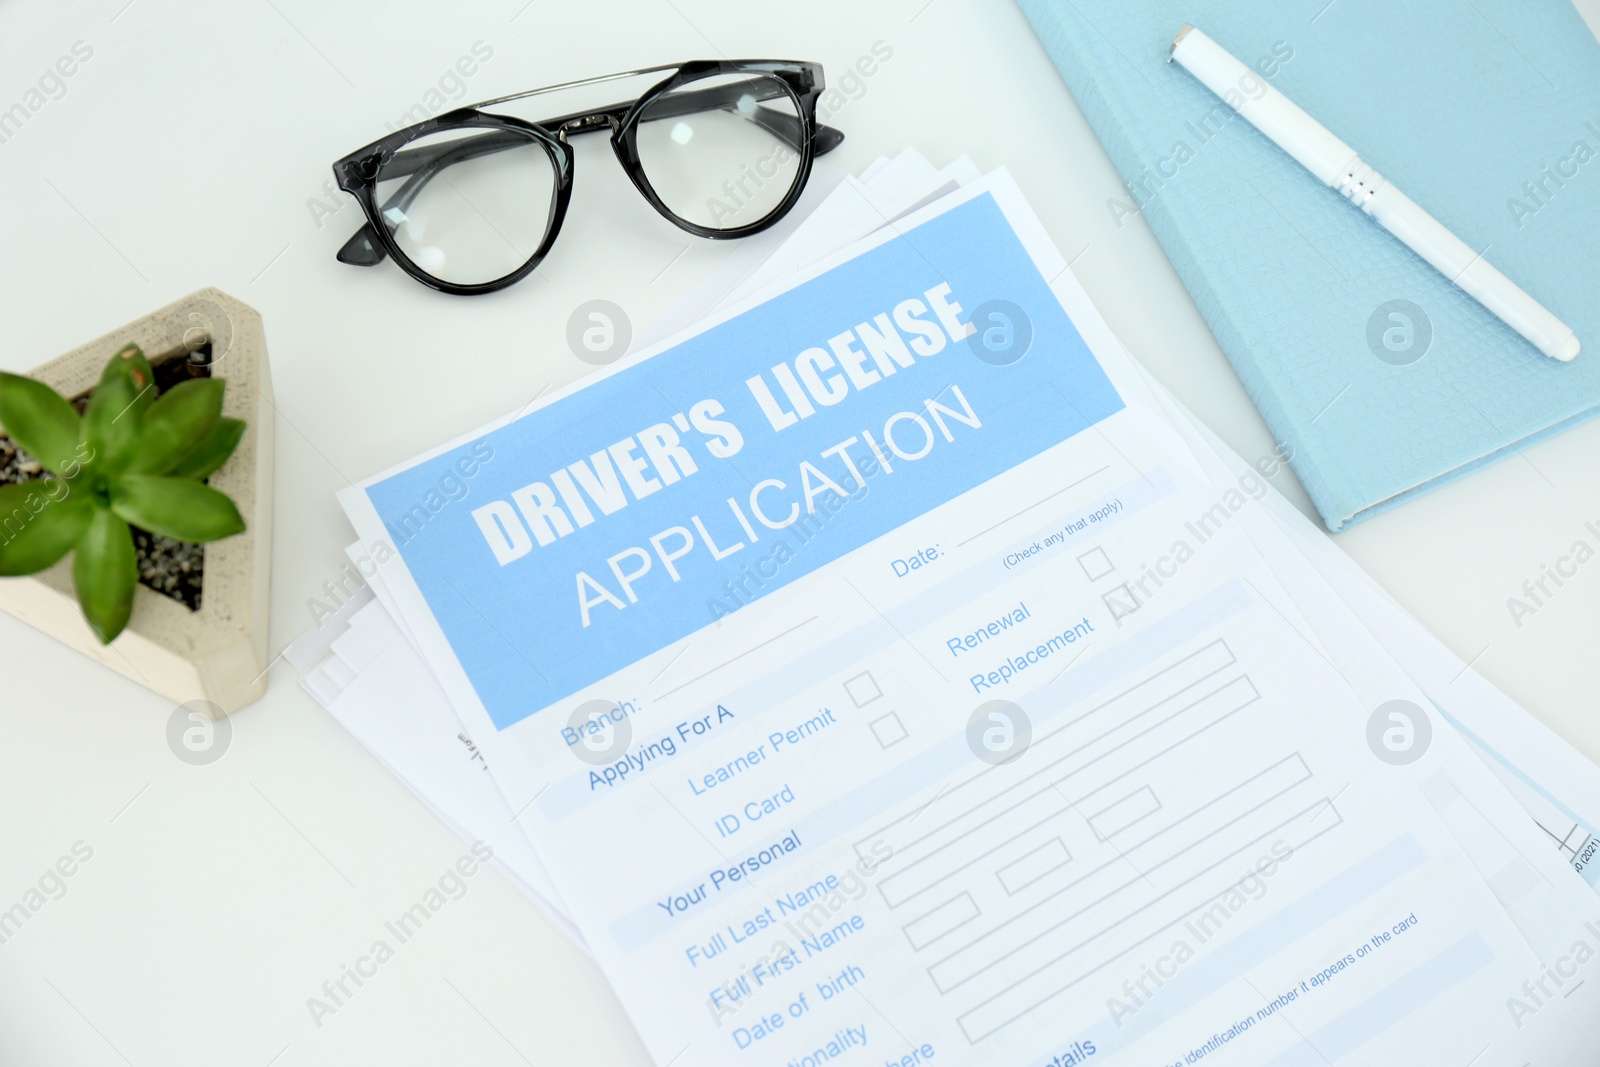 Photo of Driver's license application form with stationery, glasses and plant on white table